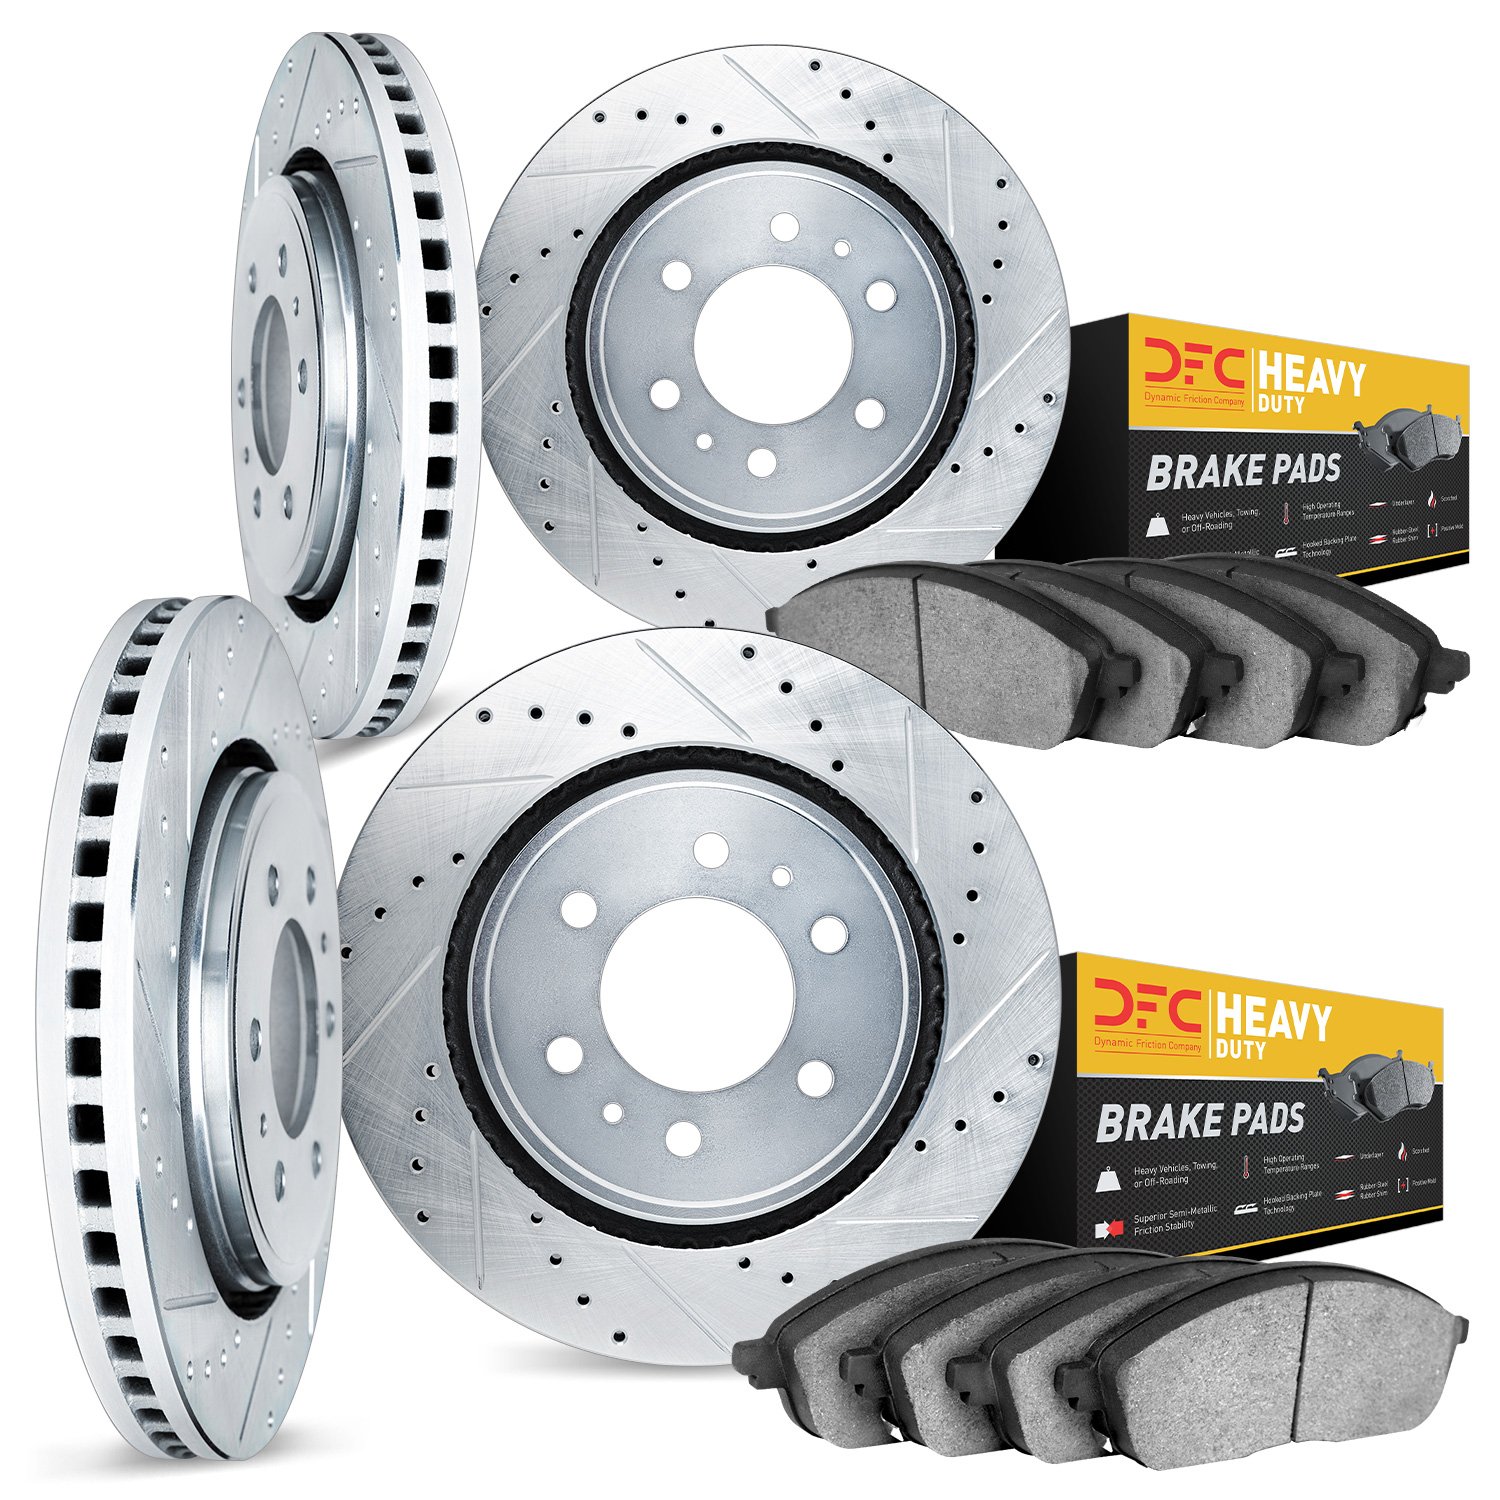 7204-48107 Drilled/Slotted Rotors w/Heavy-Duty Brake Pads Kit [Silver], 2007-2014 GM, Position: Front and Rear